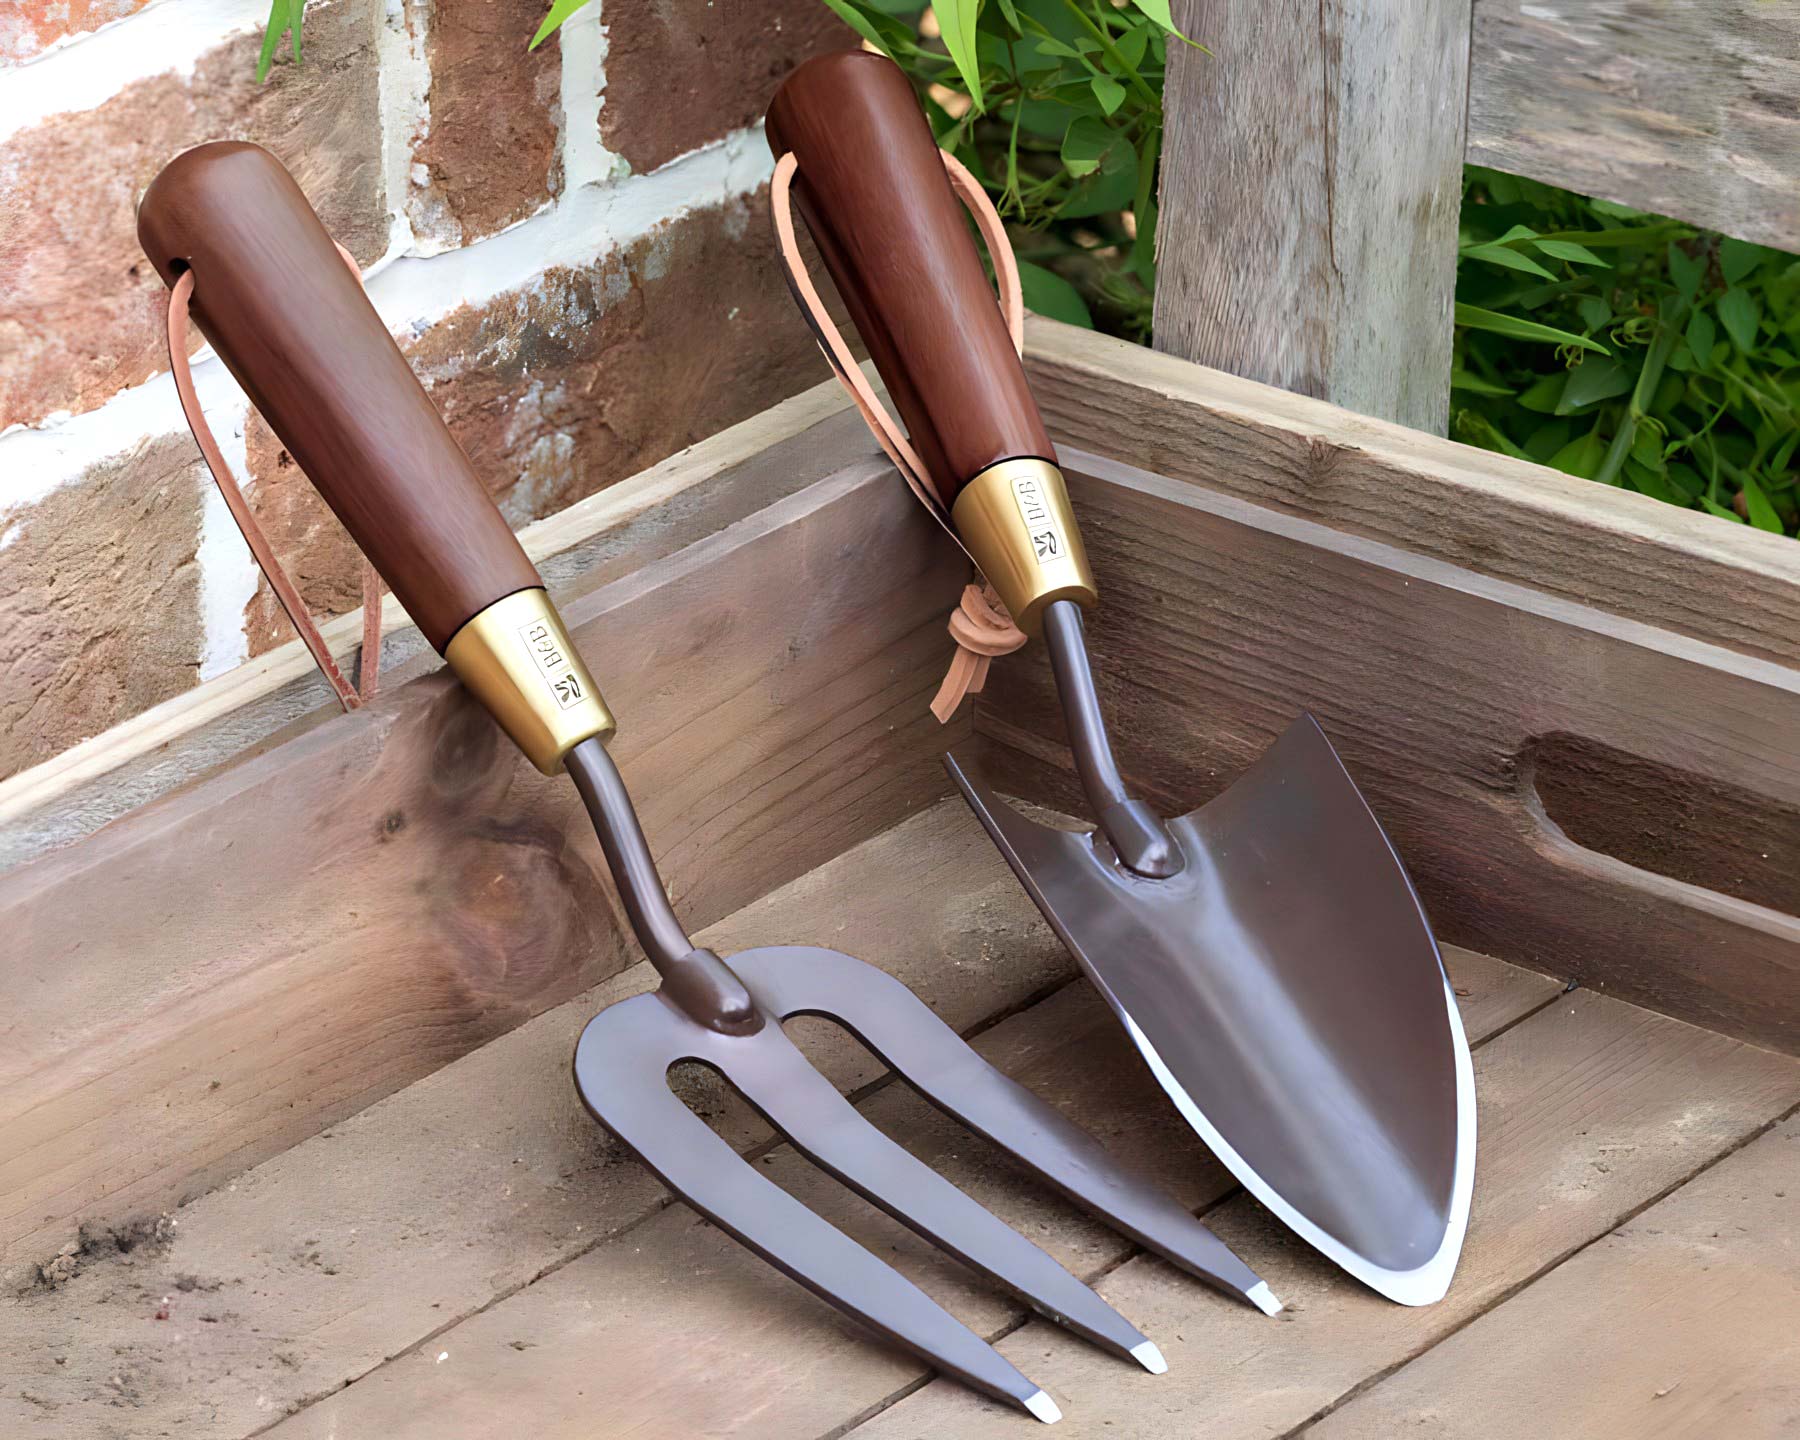 Hand Fork and Trowel - National Trust range of quality garden tools